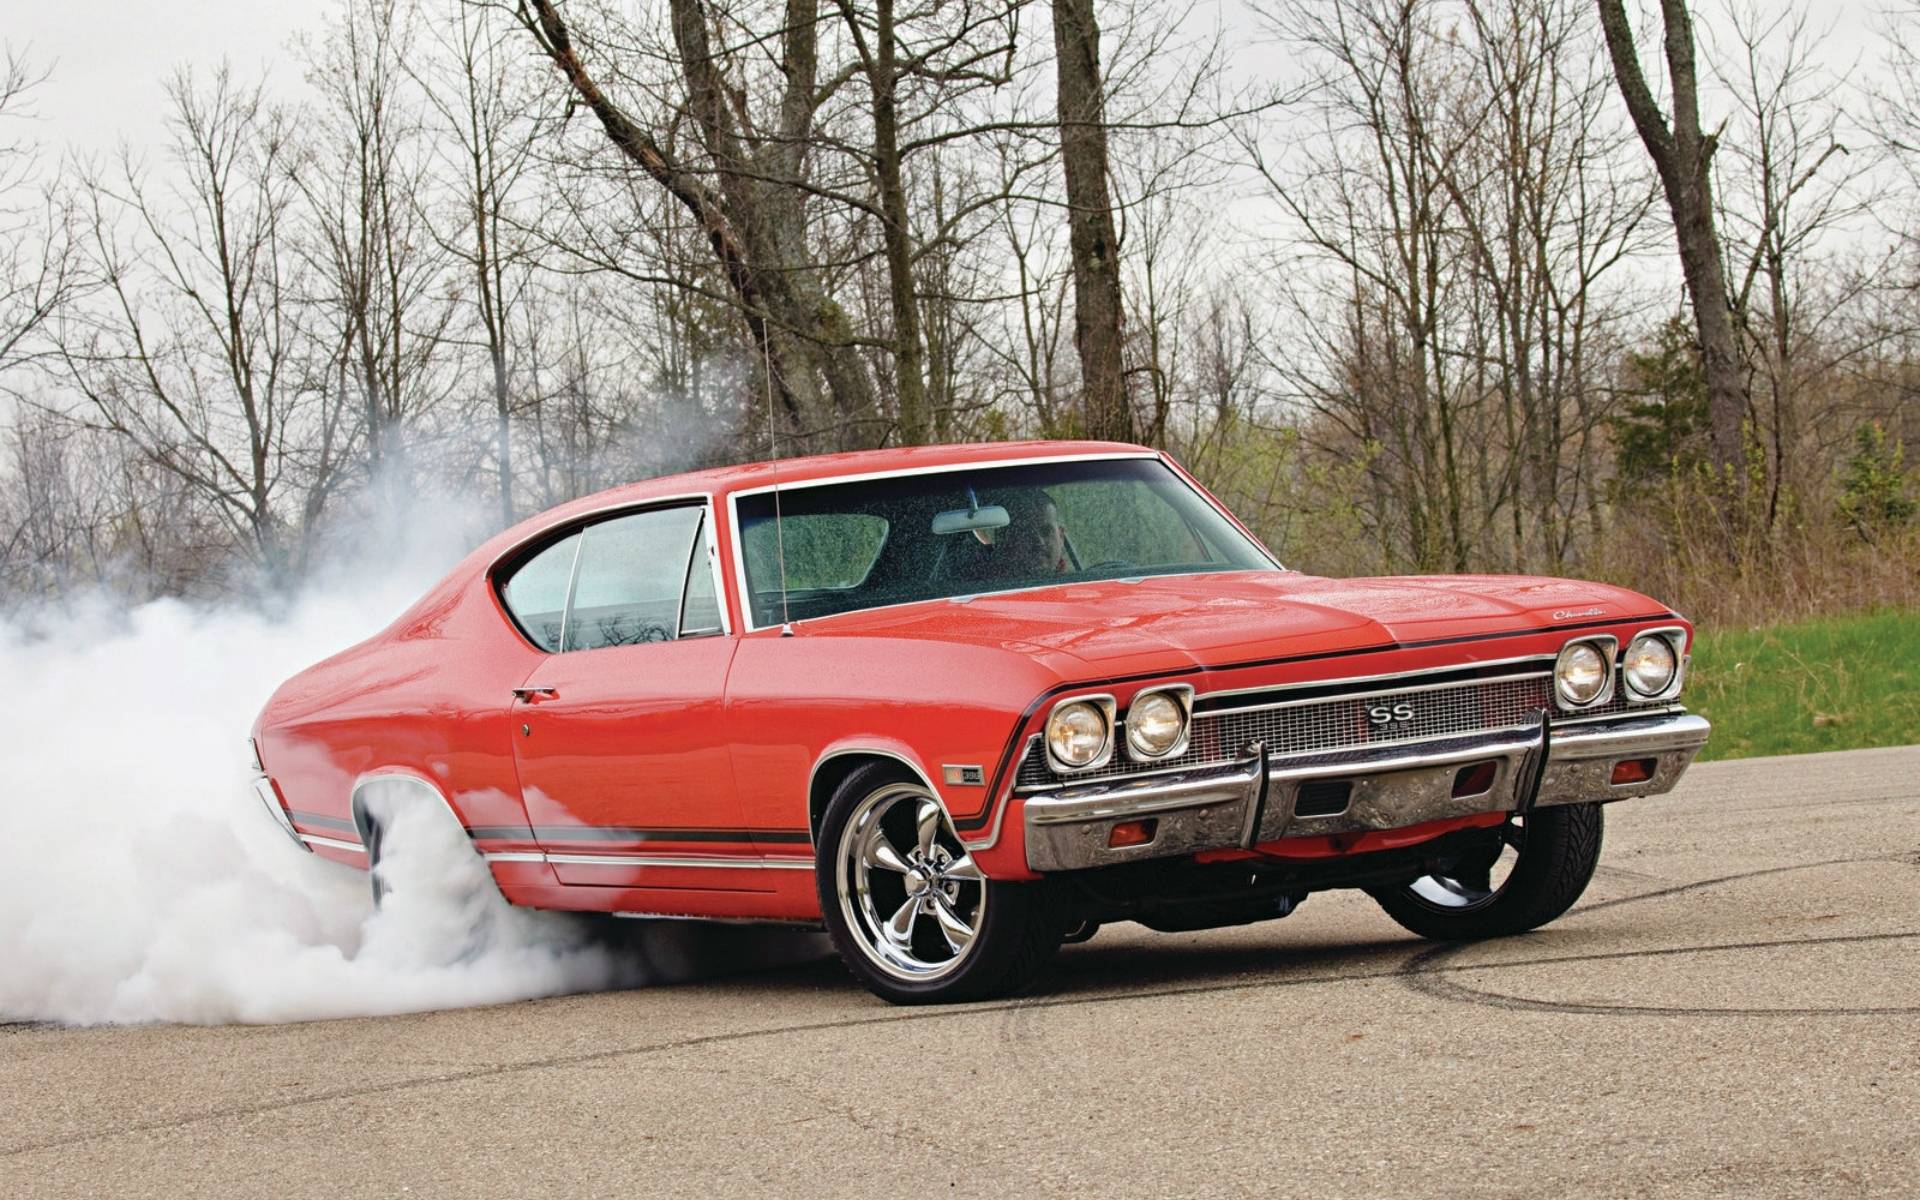 Chevelle SS Wallpapers - Wallpaper Cave